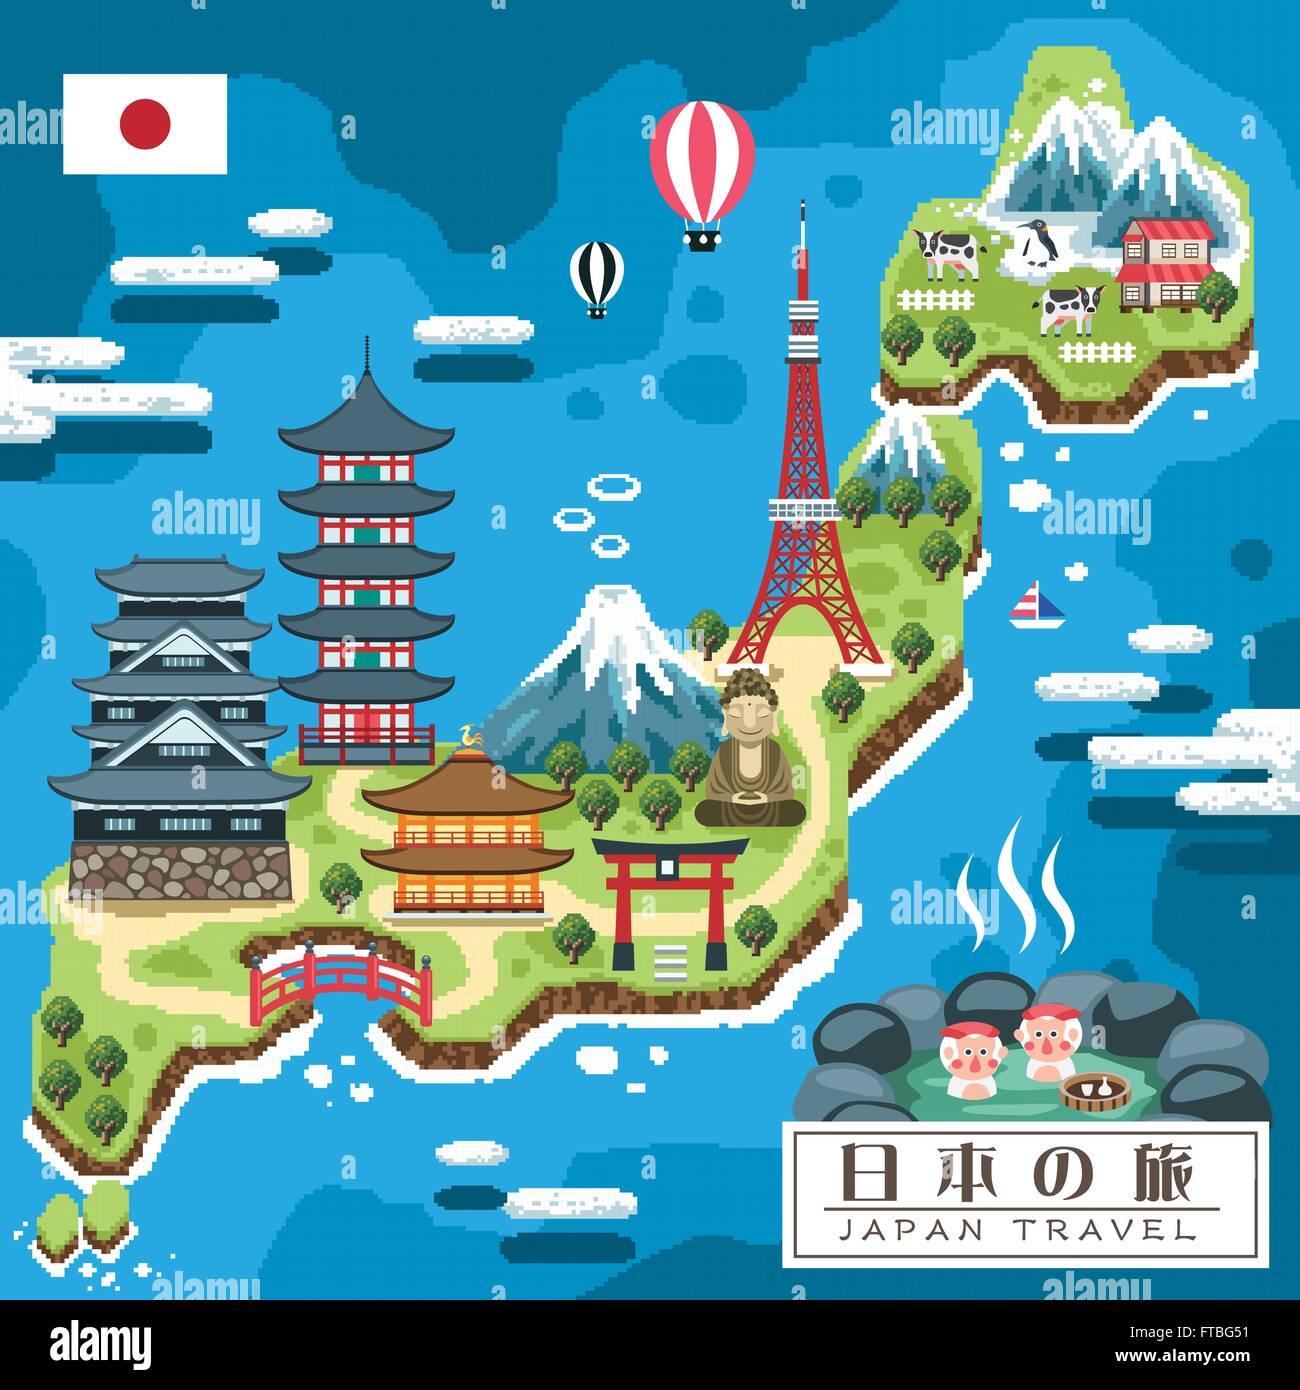 funny Japan travel map in pixel style - Japan travel in Japanese on ...